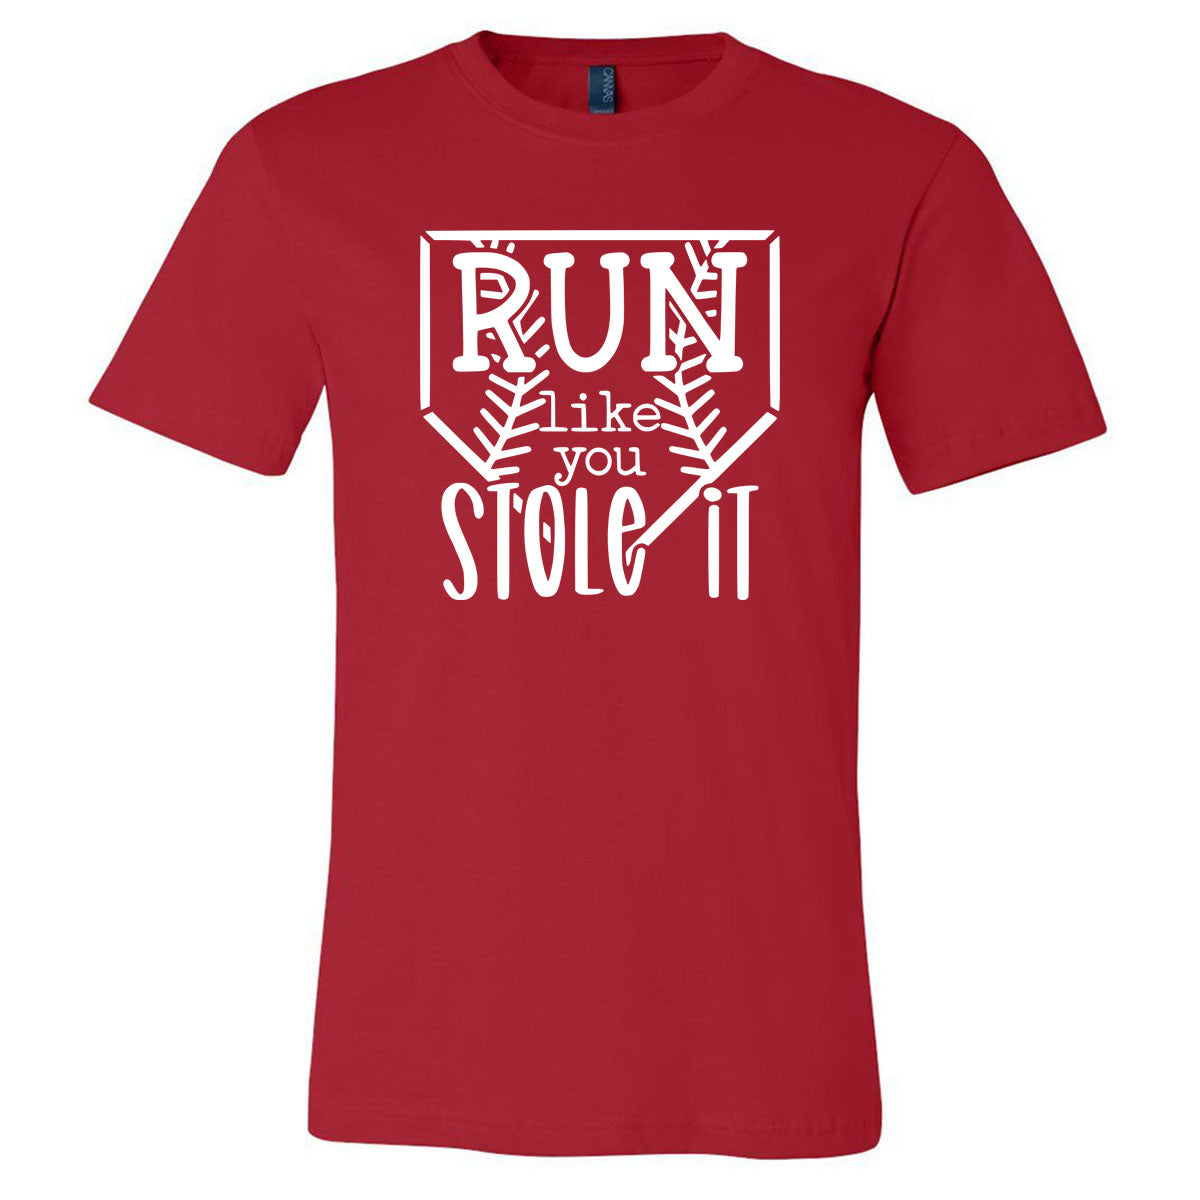 Run Like You Stole It - Short Sleeve Tee - Southern Grace Creations